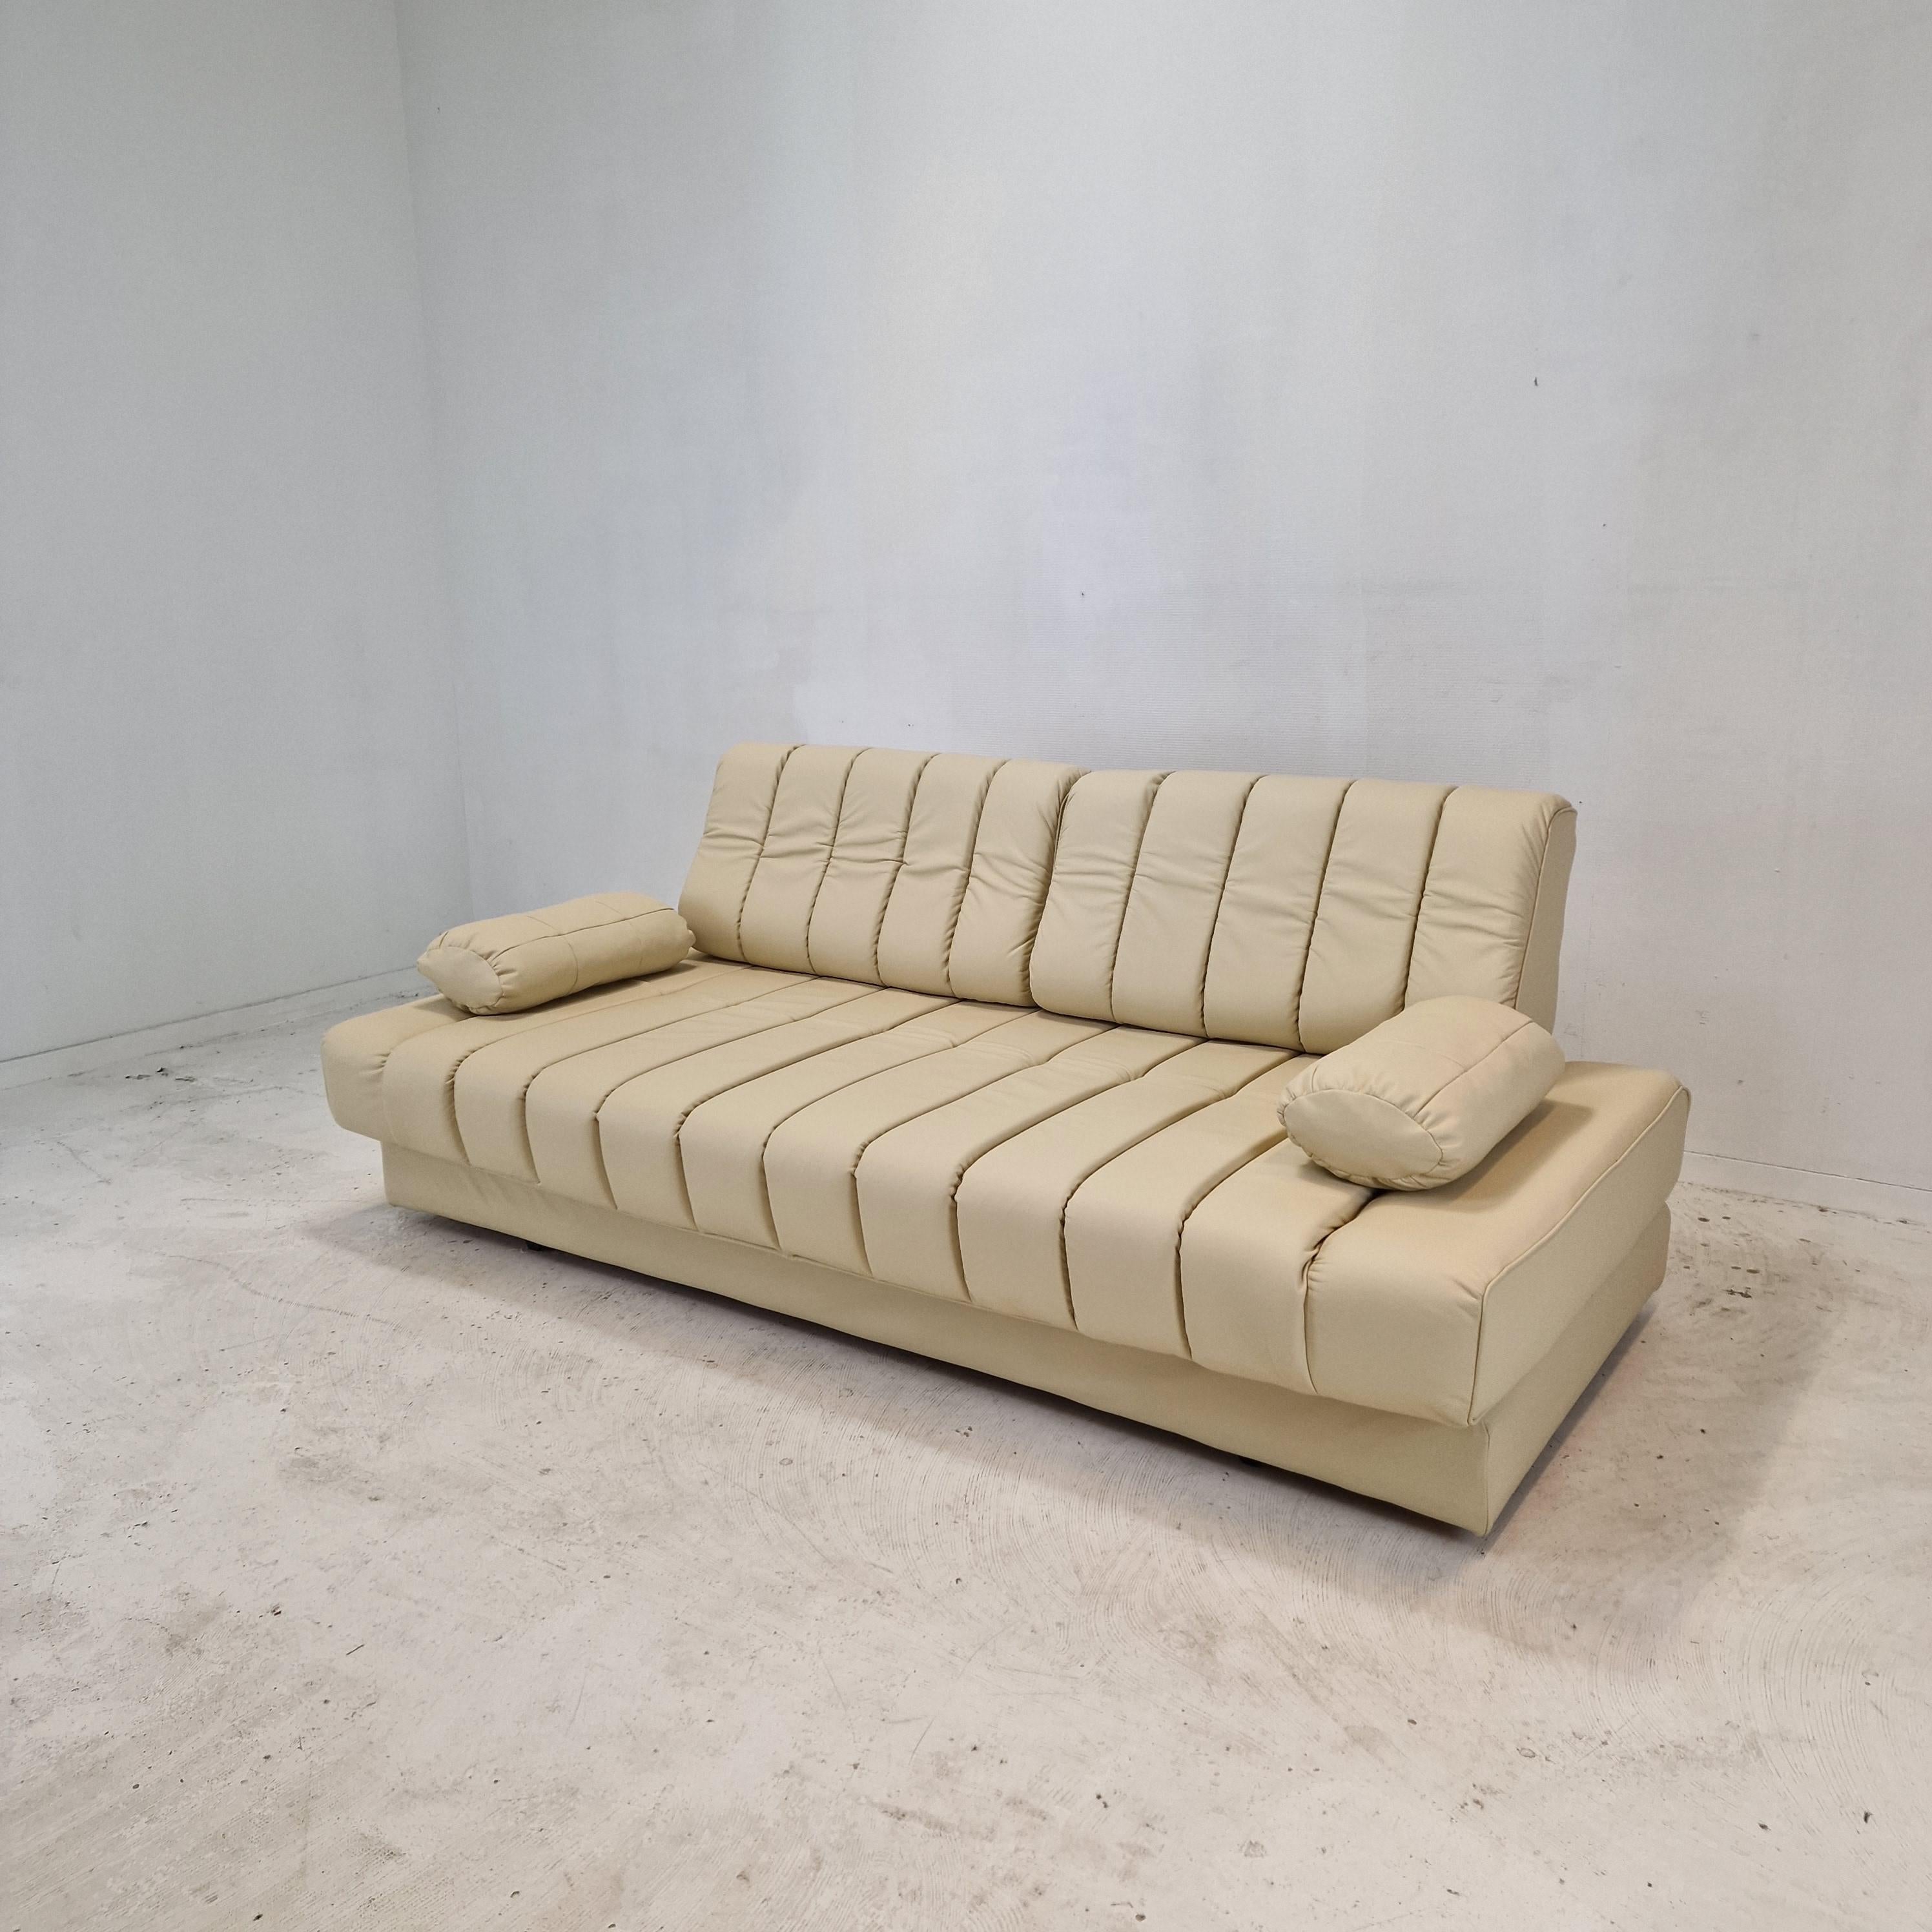 Amazing DS-85 sofa or daybed in white (cream) leather. 
This DS 85 daybed was designed and manufactured in the 1970s by De Sede in Switzerland. 

This extremely comfortable sofa or loveseat can be opened out into a comfortable double bed. 
A